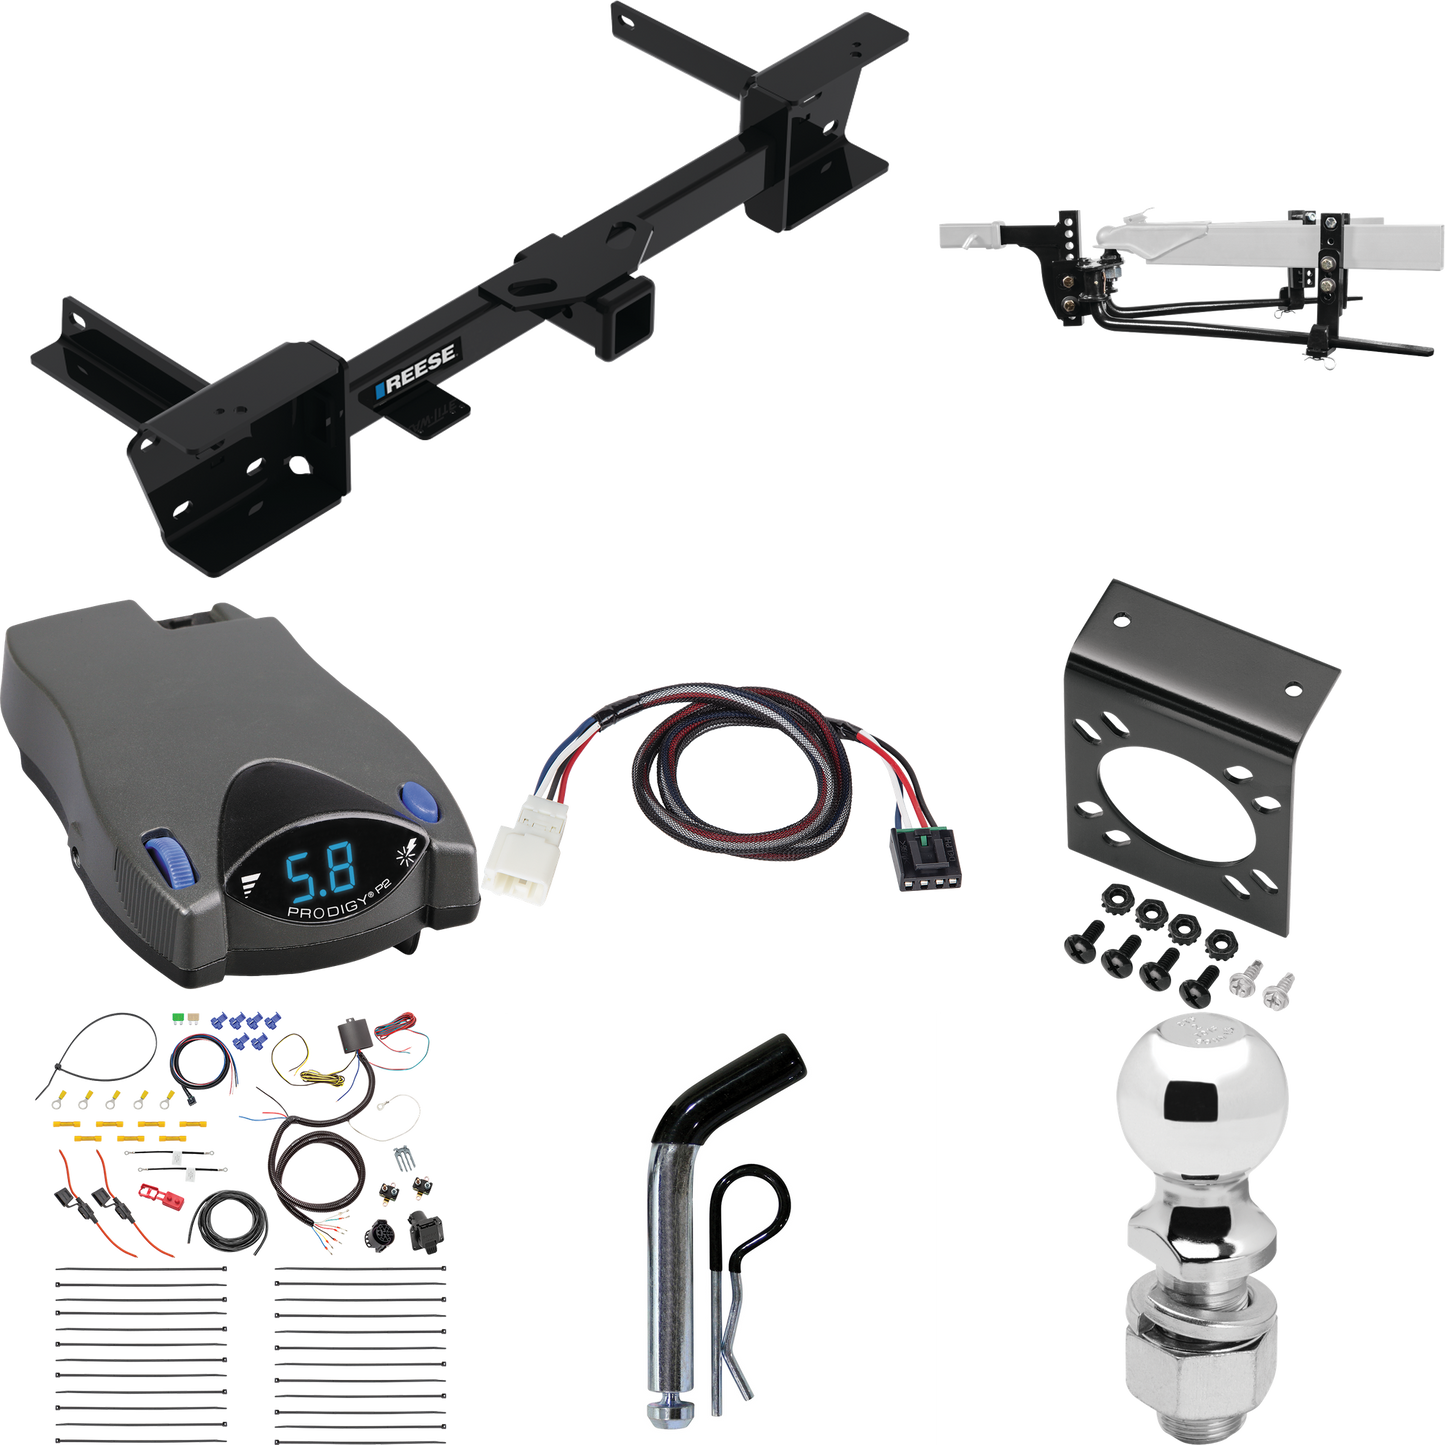 Fits 2023-2023 Subaru Ascent Trailer Hitch Tow PKG w/ 6K Round Bar Weight Distribution Hitch w/ 2-5/16" Ball + 2" Ball + Pin/Clip + Tekonsha Prodigy P2 Brake Control + Plug & Play BC Adapter + 7-Way RV Wiring By Reese Towpower